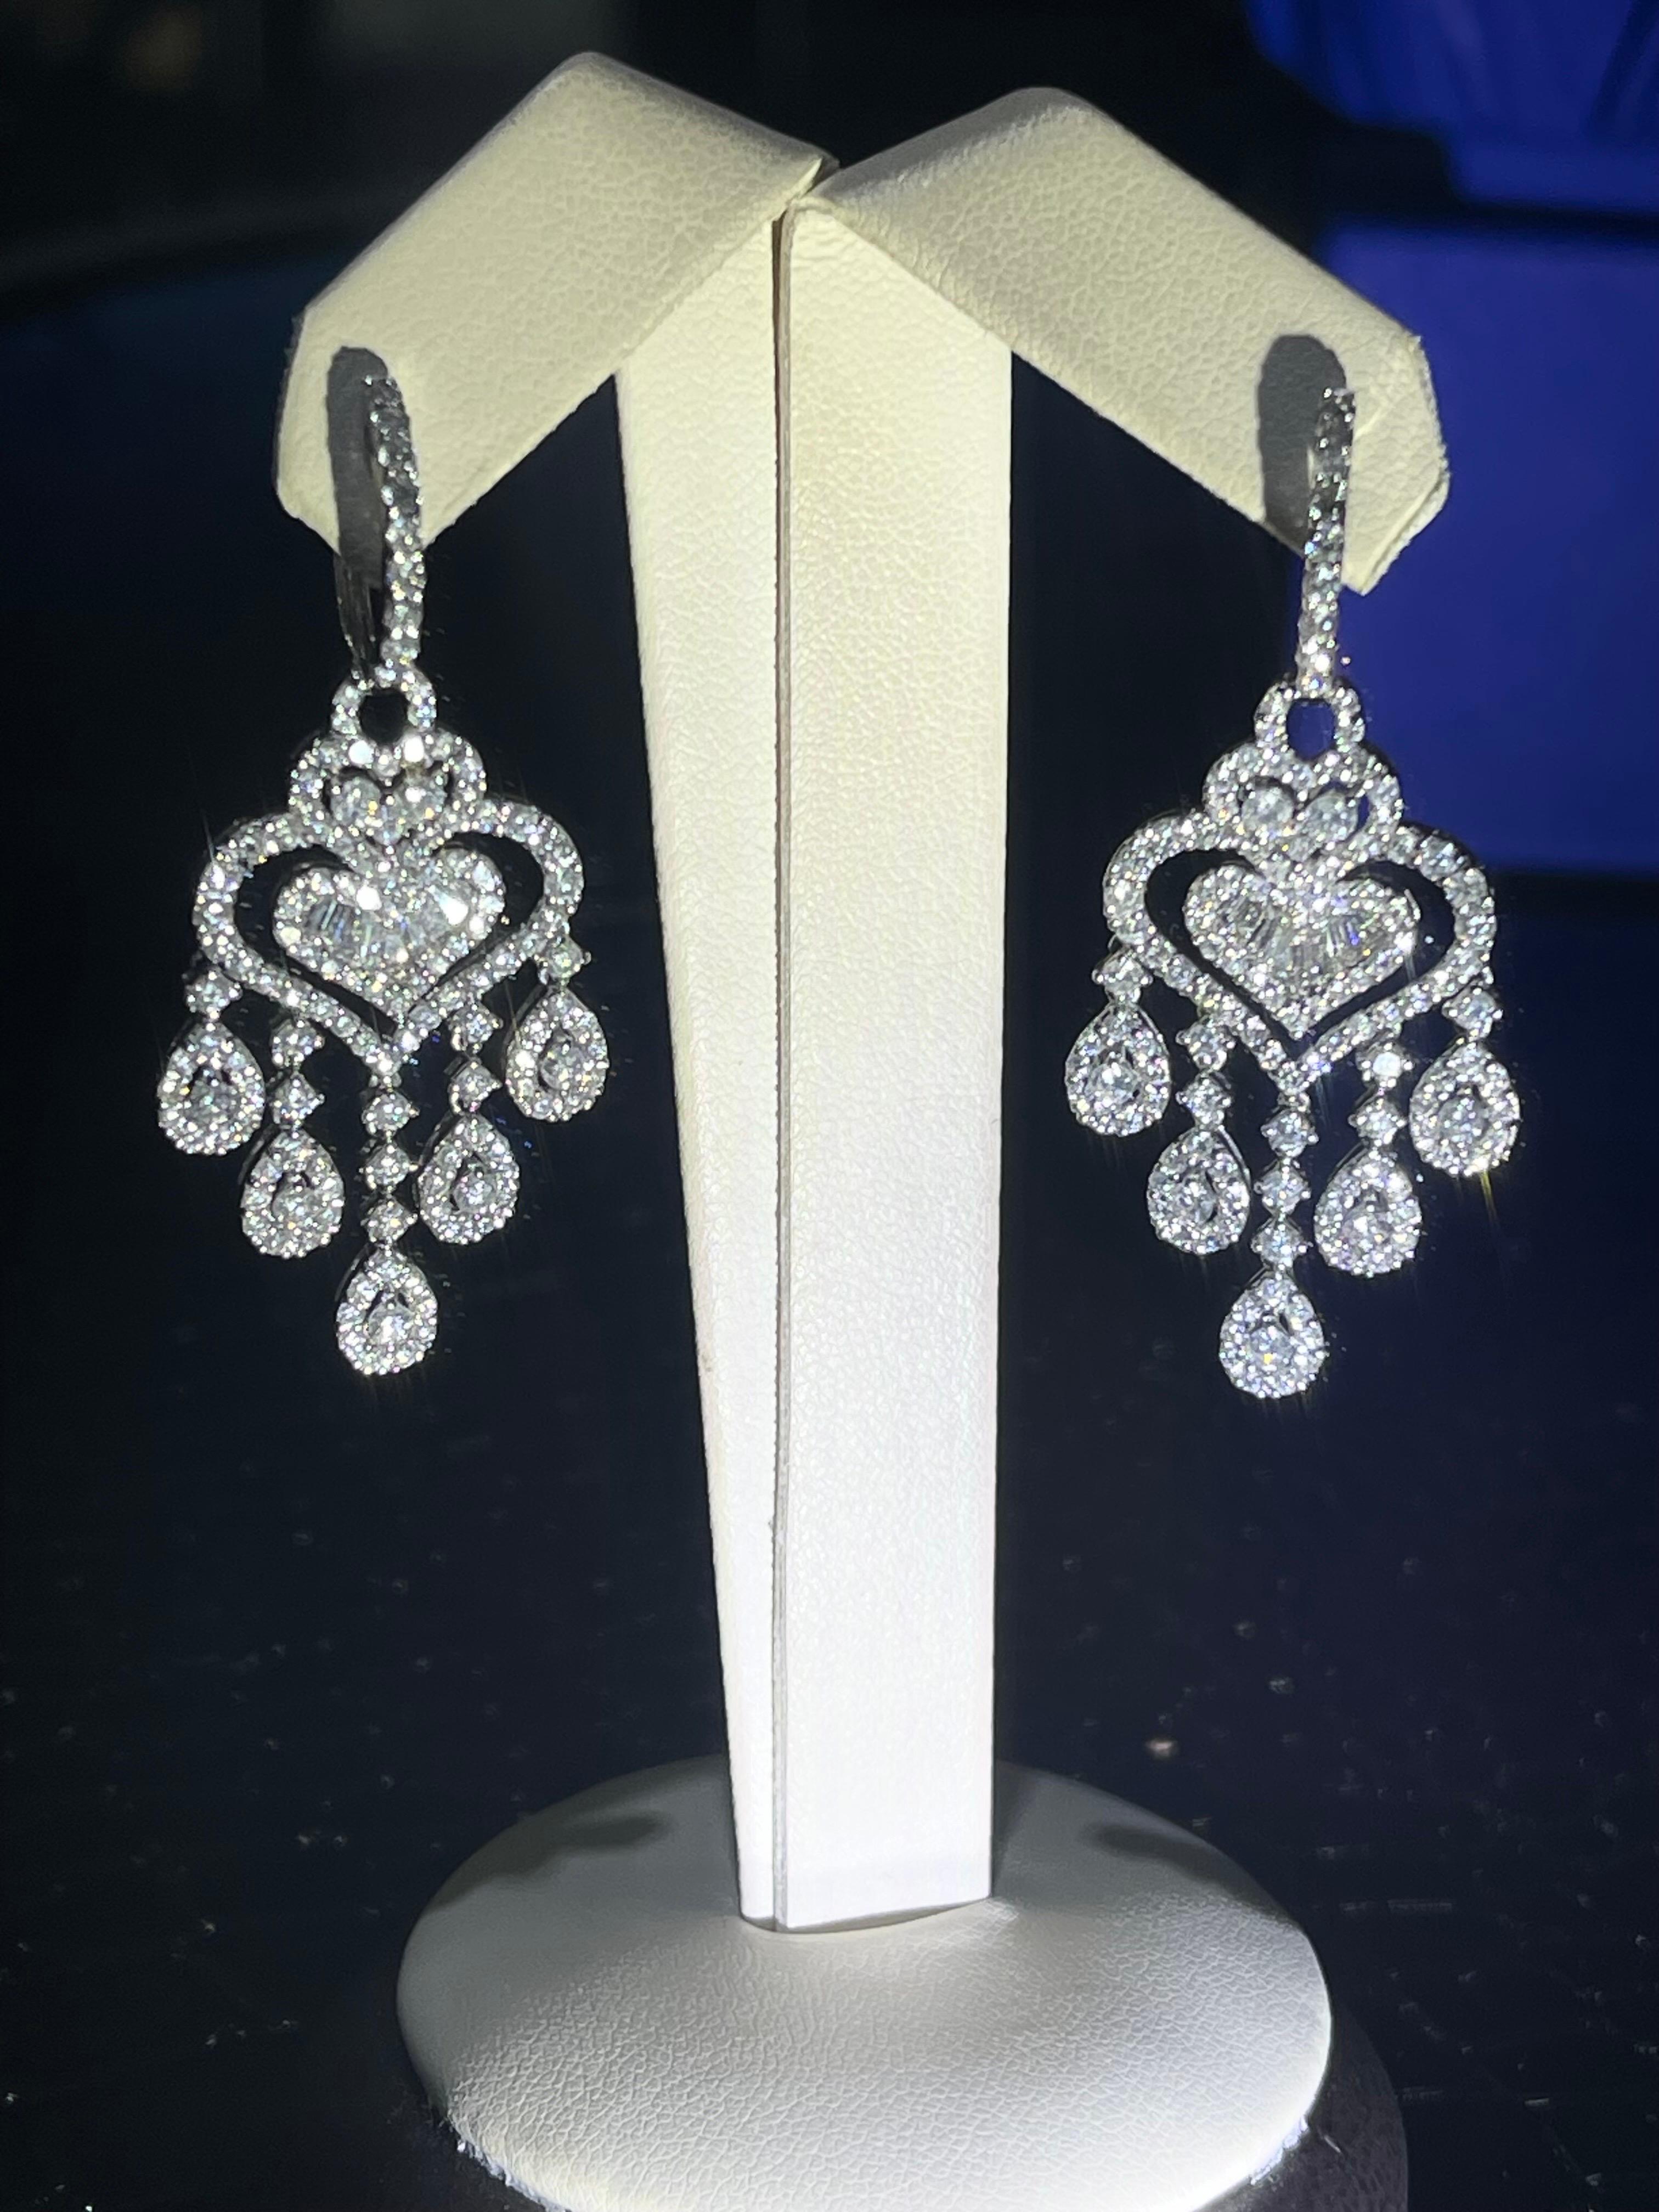 Fabulous Chandelier Diamond Earrings In 18k White Gold.

Approximately 7.5 carats in diamonds,

Hanging length is 2”.